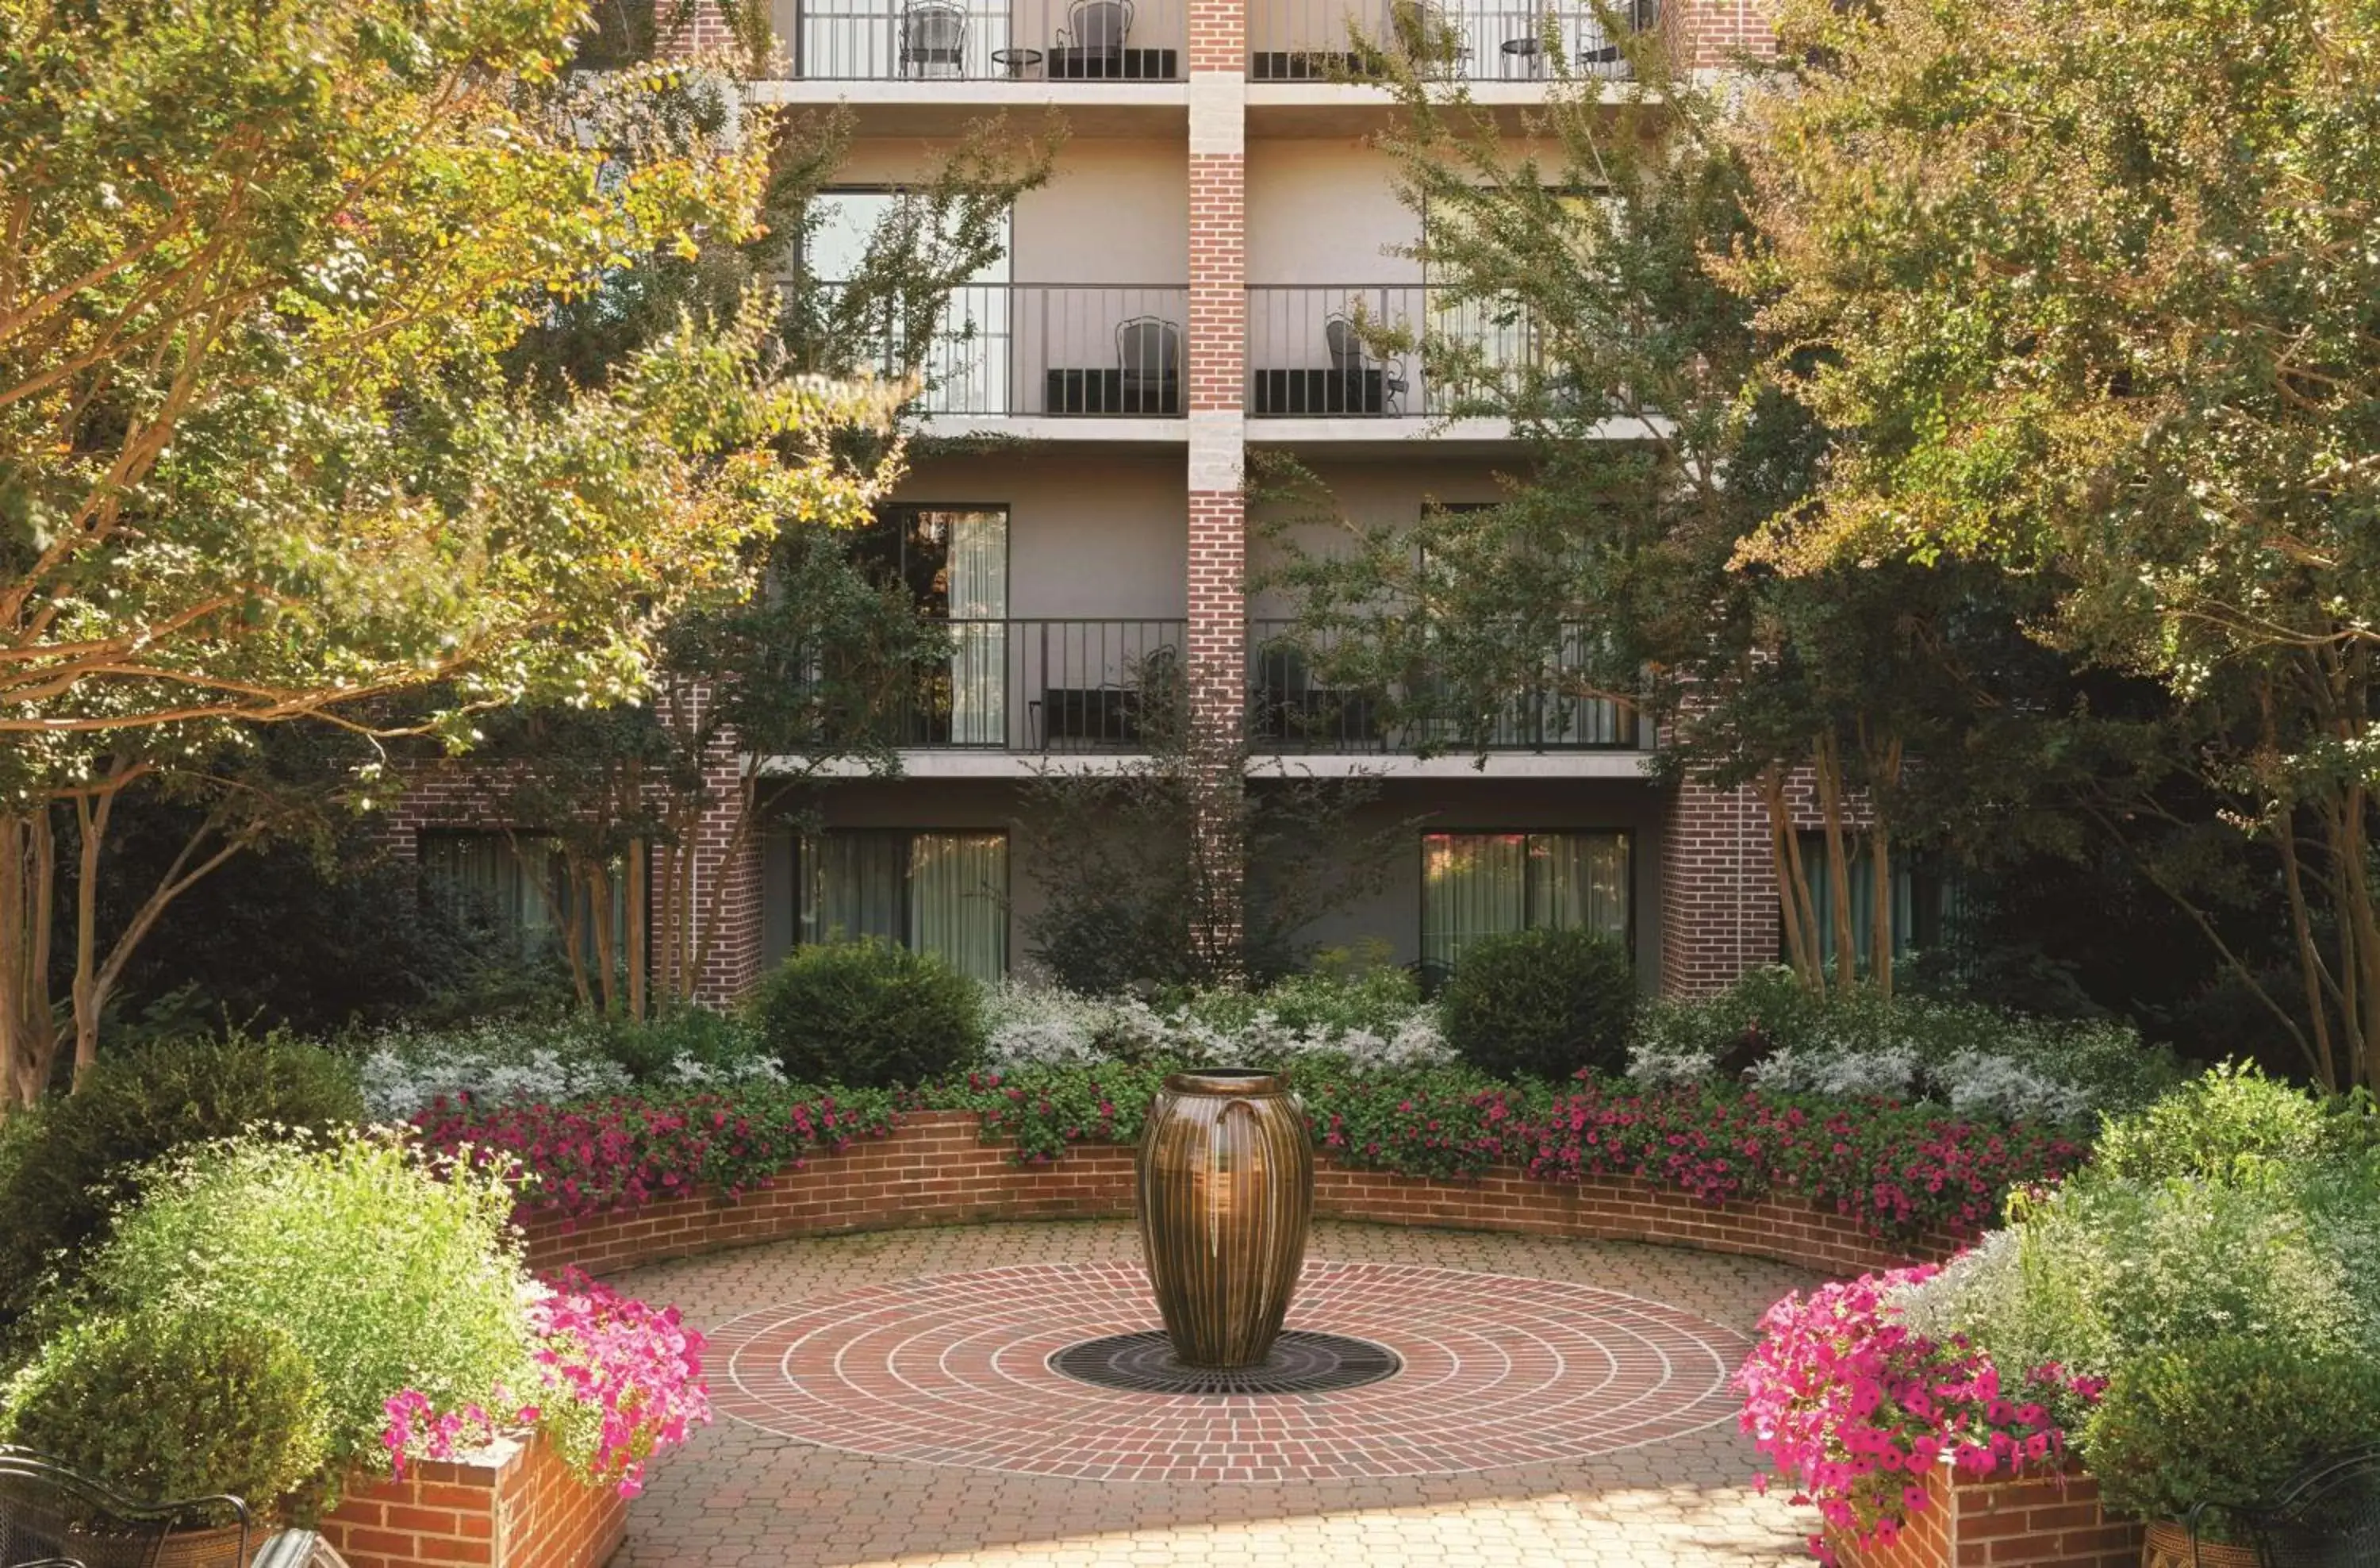 Inner courtyard view, Property Building in DoubleTree by Hilton Biltmore/Asheville